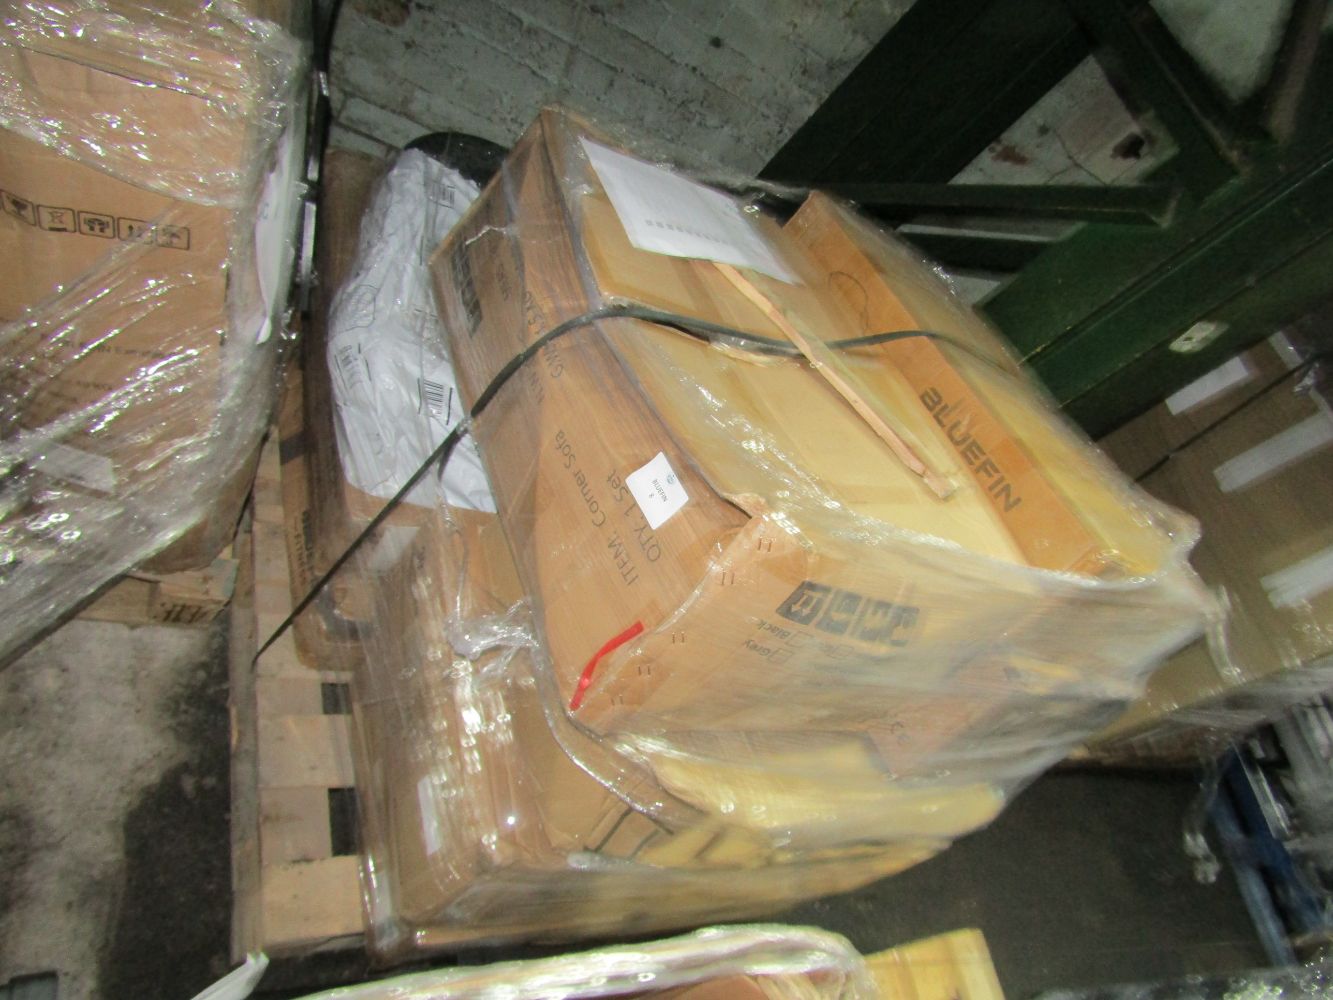 pallets of fitness customer returns includes treadmills, bikes, vibro plates and more